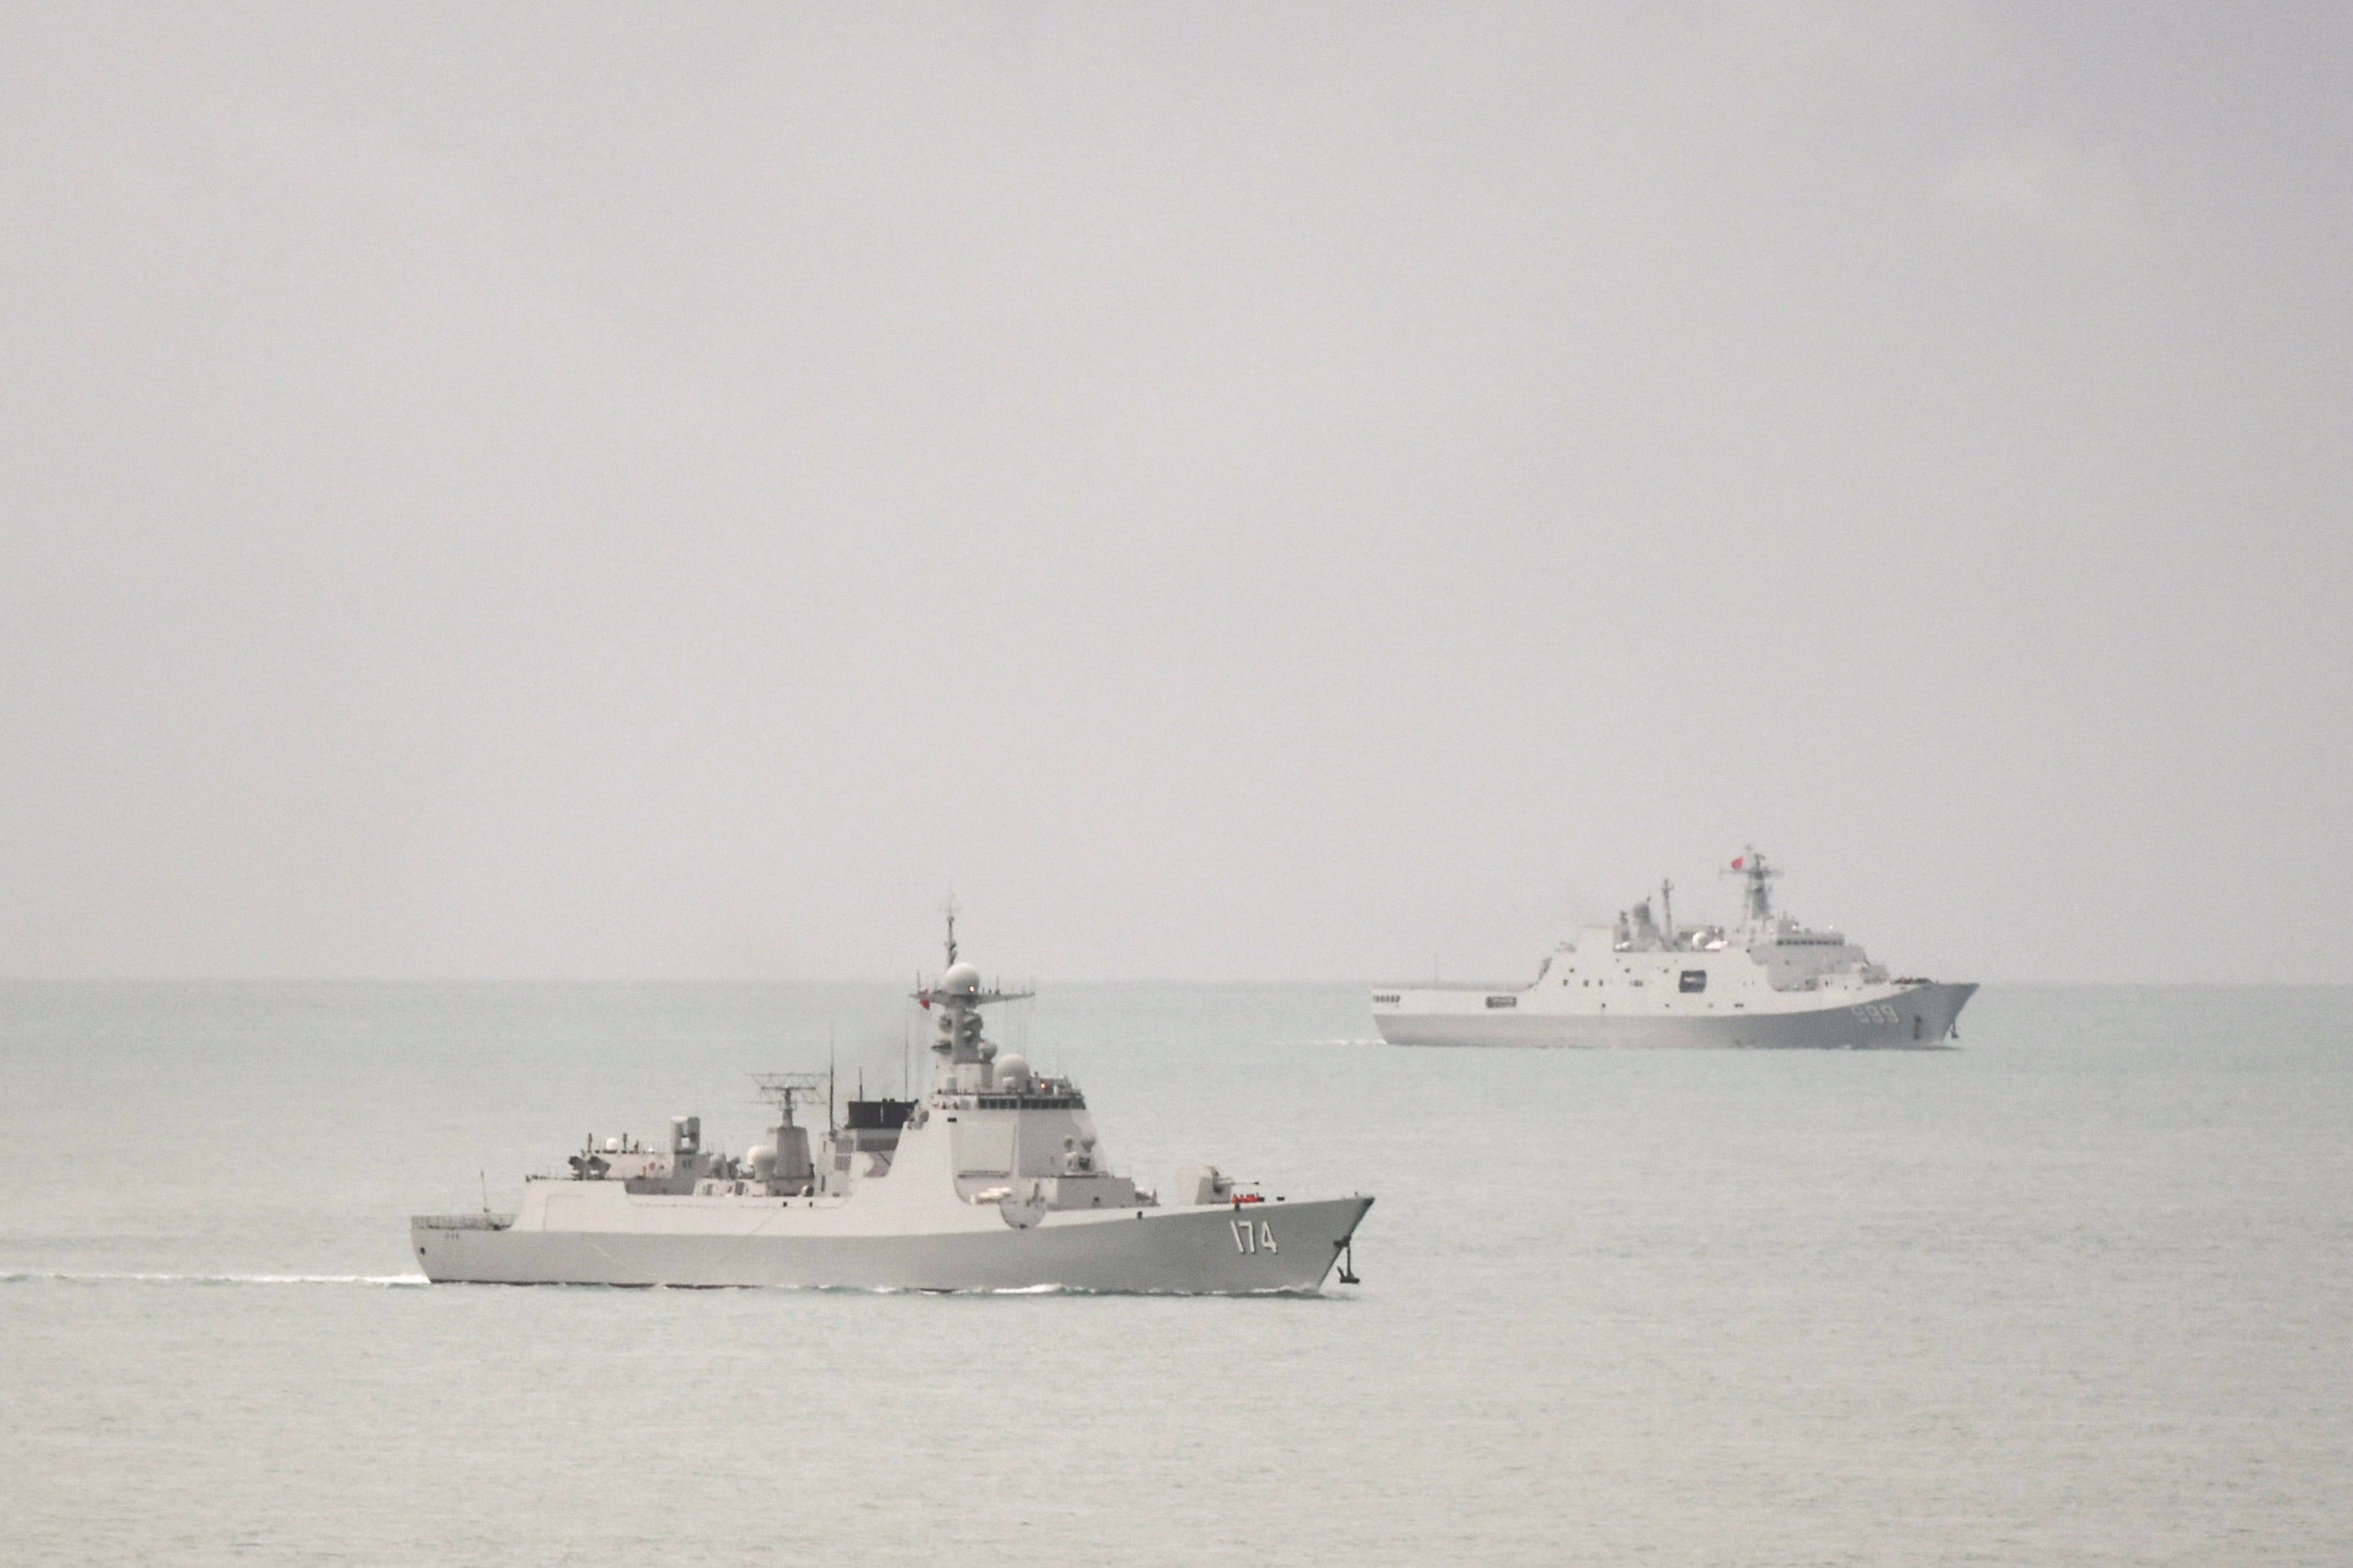 A PLA-N Luyang-class guided missile destroyer and a PLA-N Yuzhao-class amphibious transport dock vessel leave the Torres Strait and enter the Coral Sea